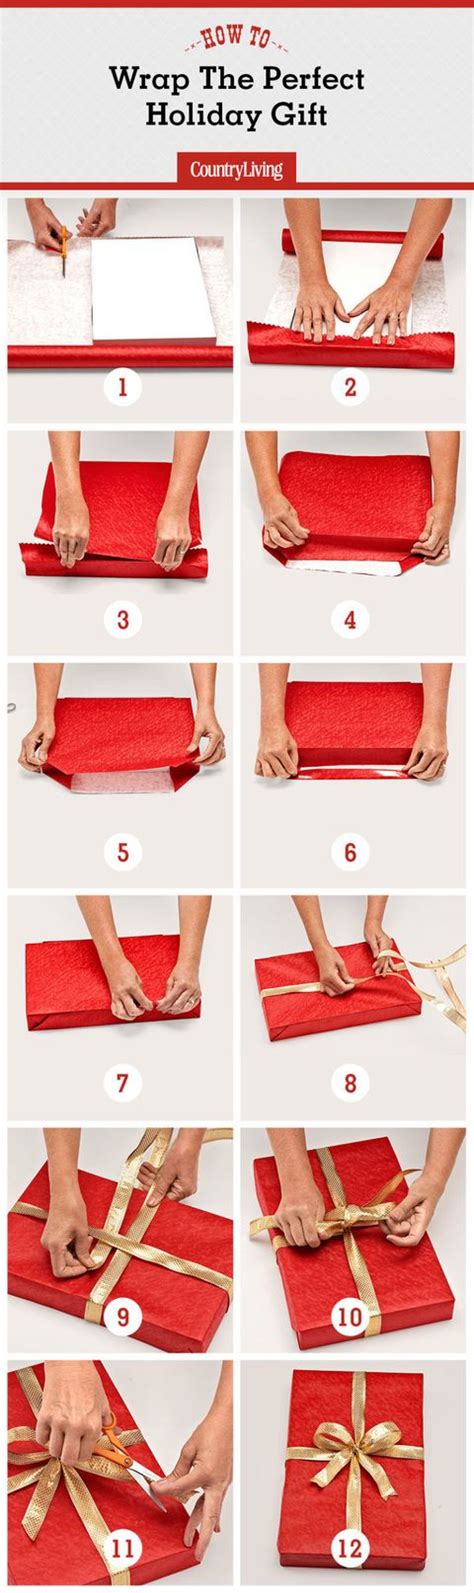 How To Wrap A T Wrapping A Present Step By Step Instructions With